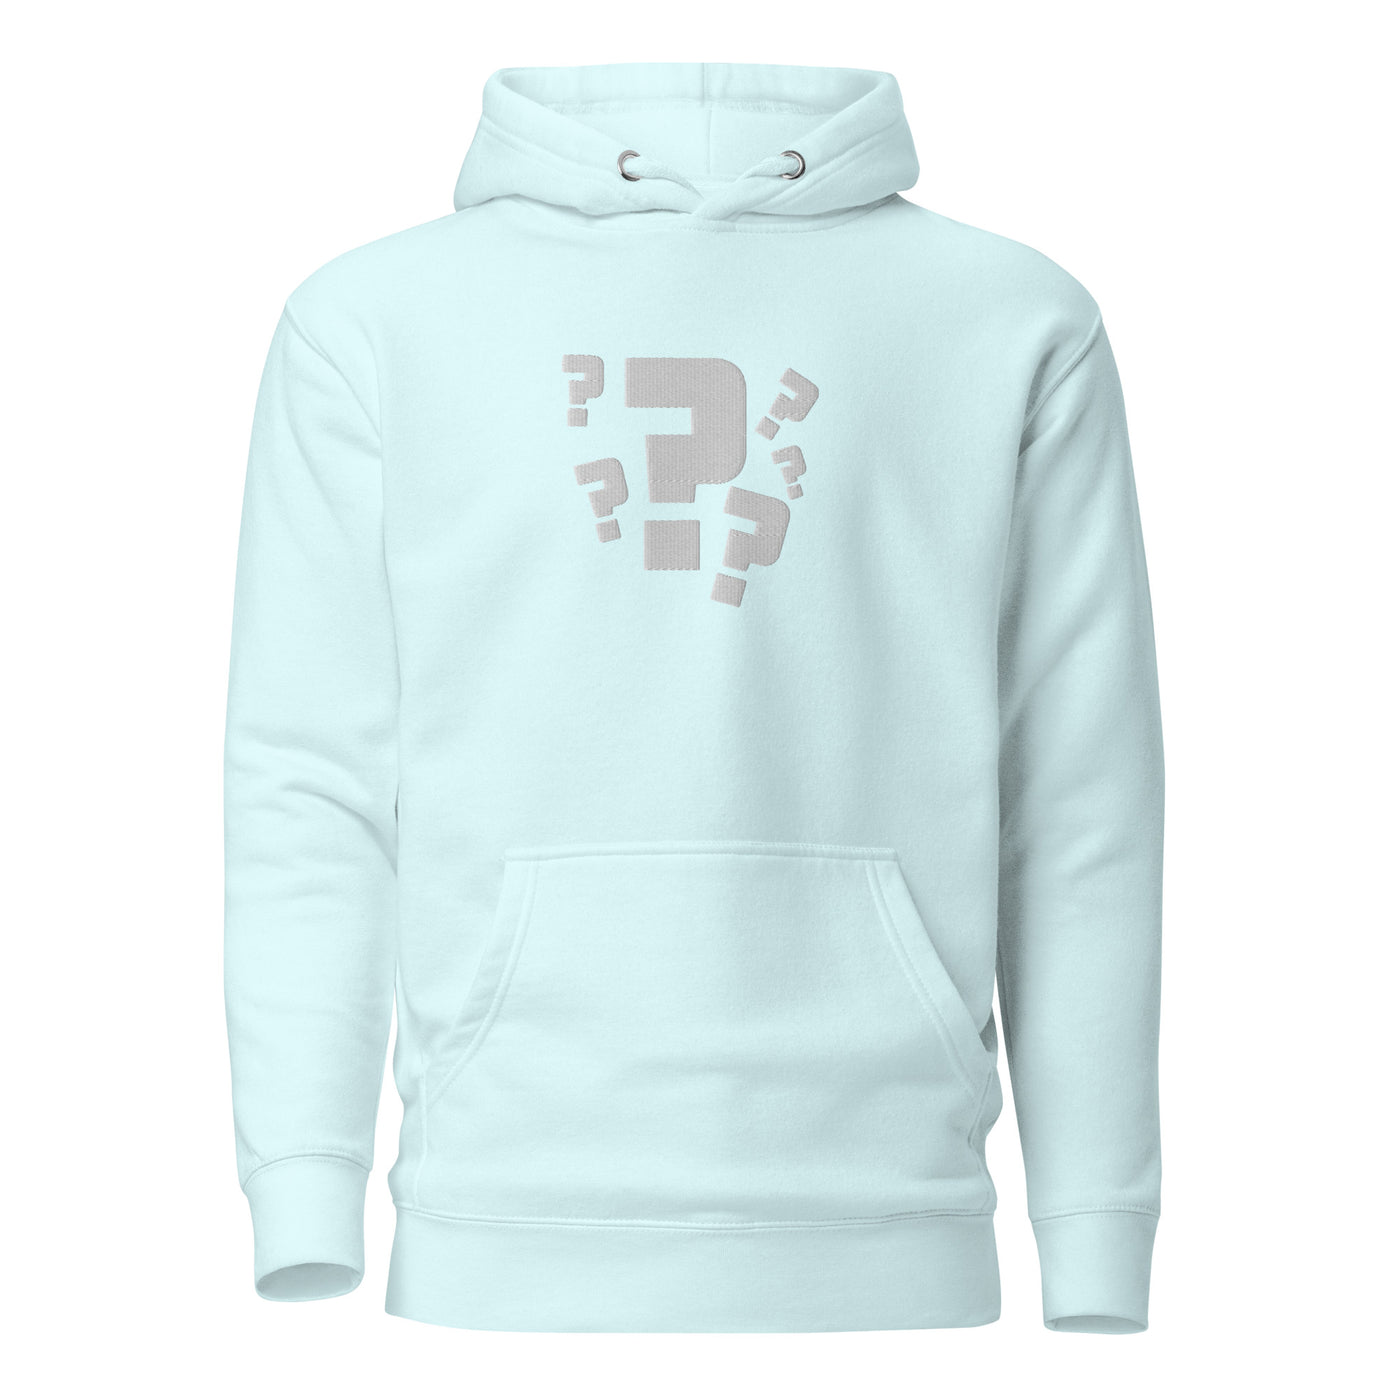 Hoodie of the Month Subscription!